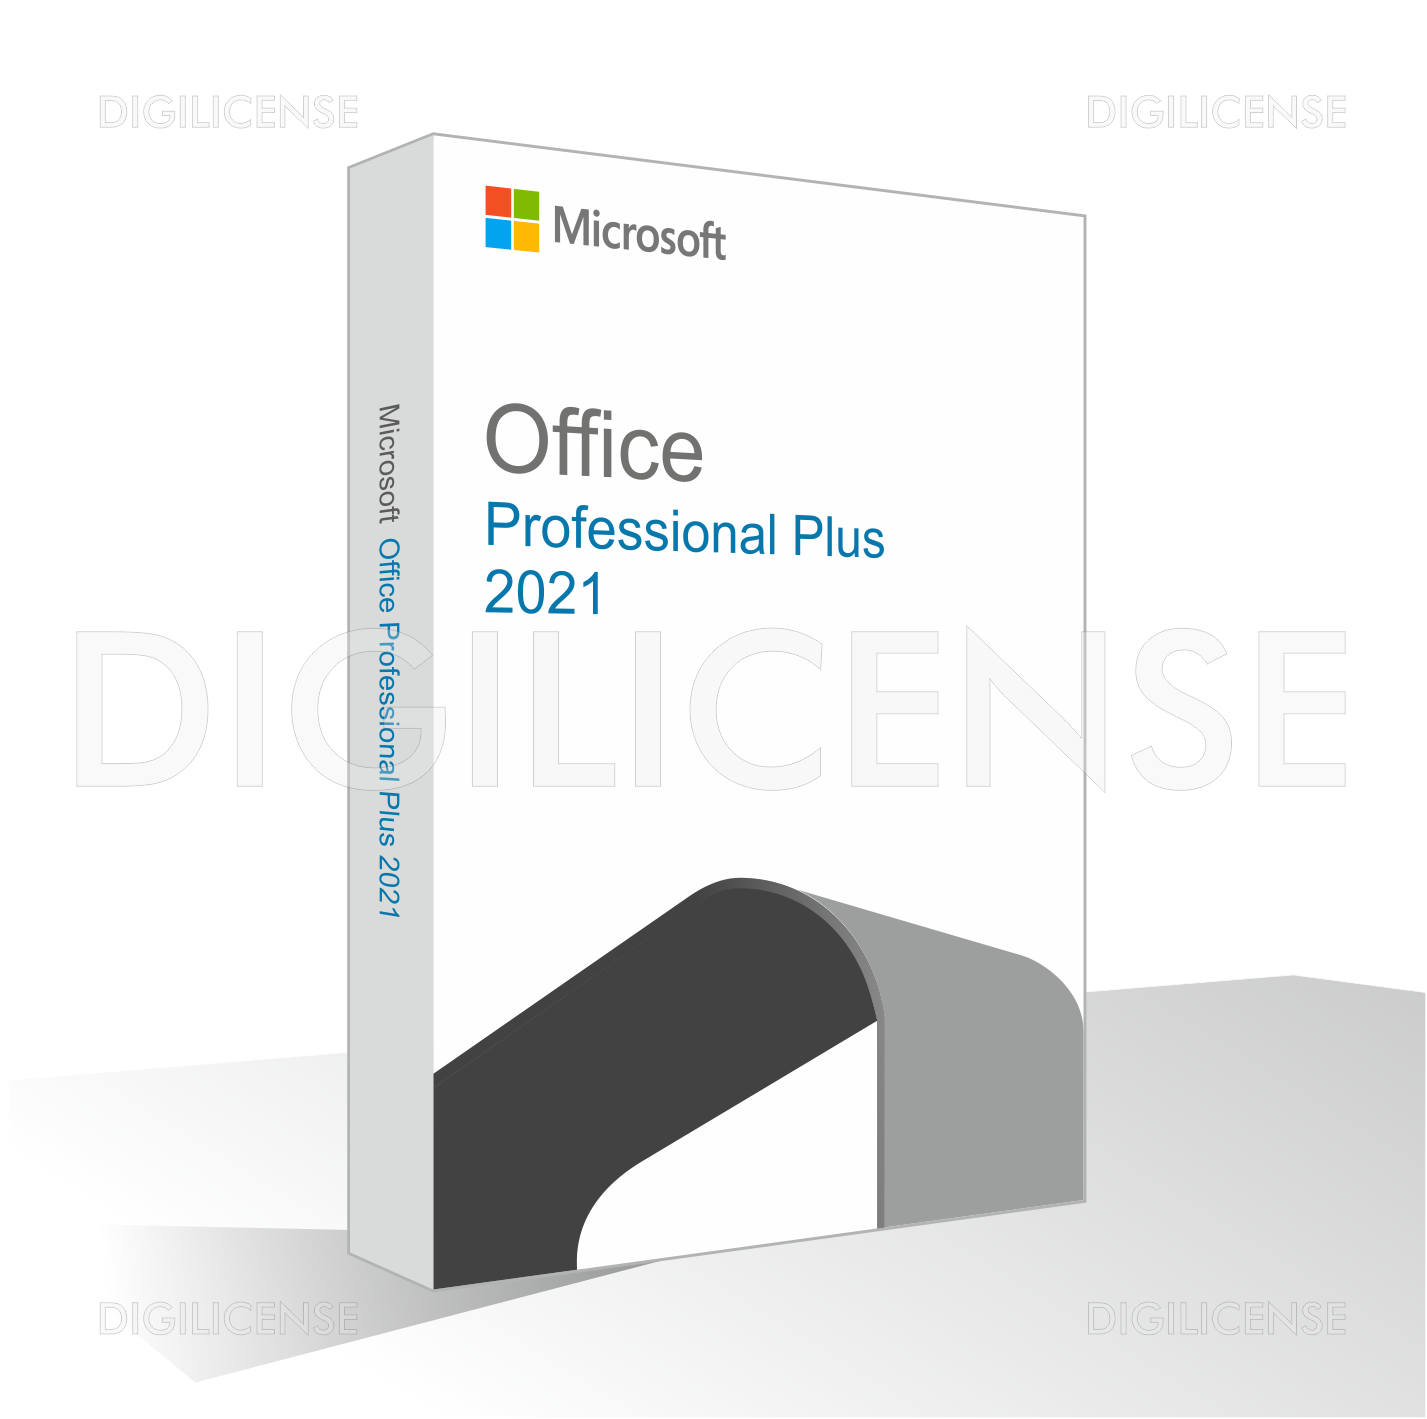 Microsoft Office 2021 Professional Plus - 1 device - Perpetual